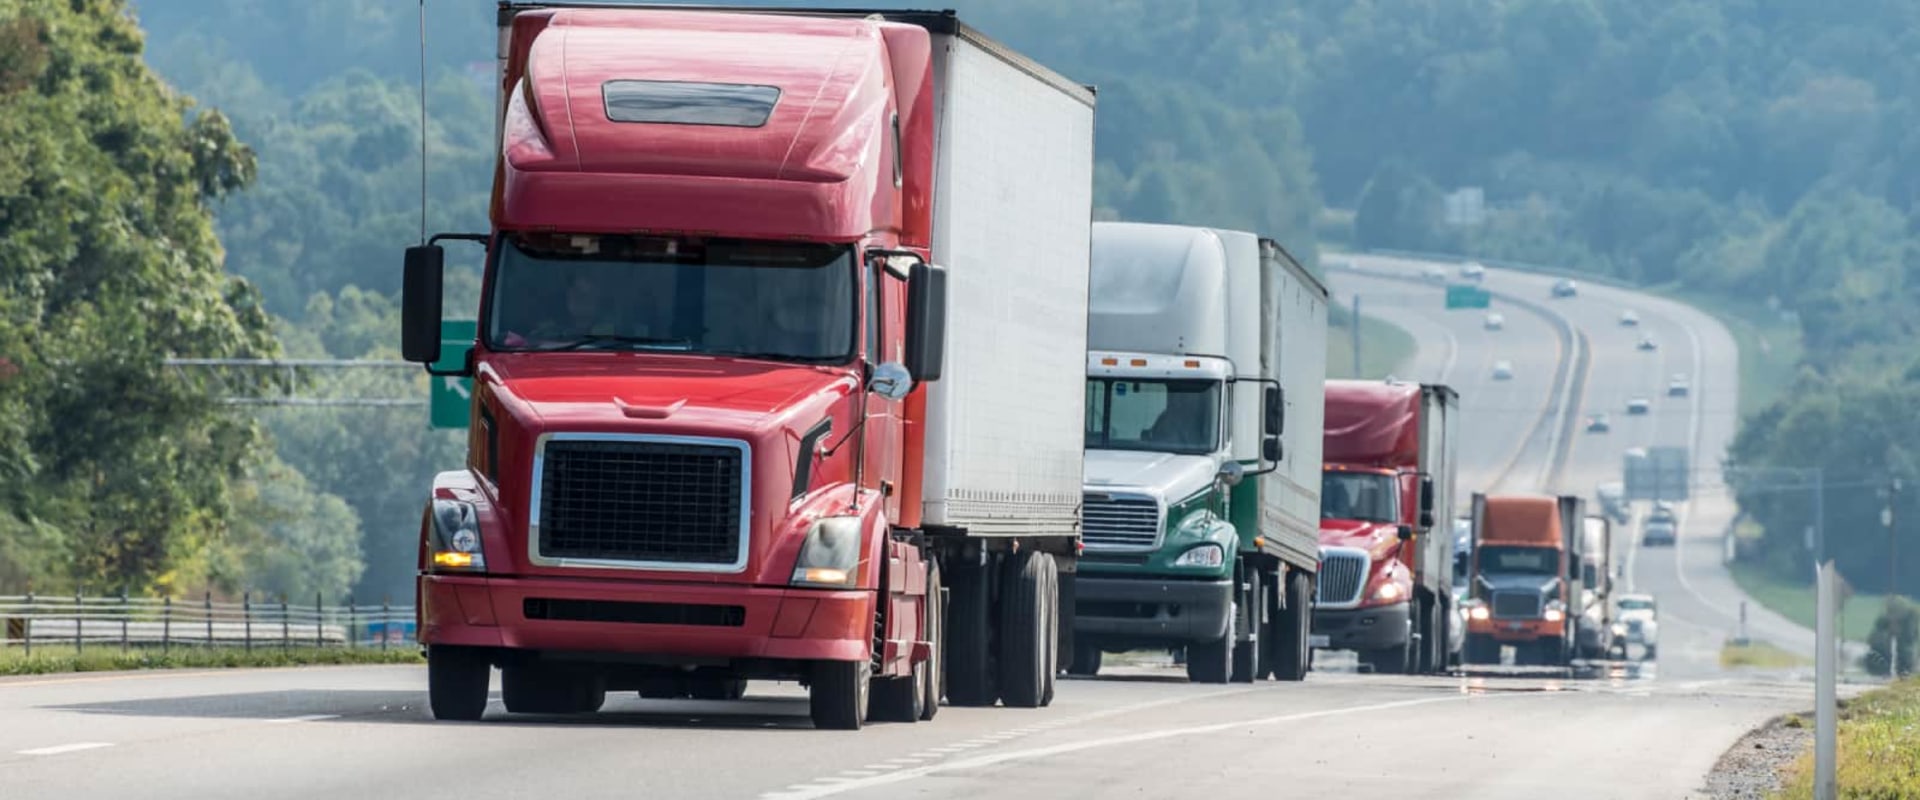 What makes a good trucking company?